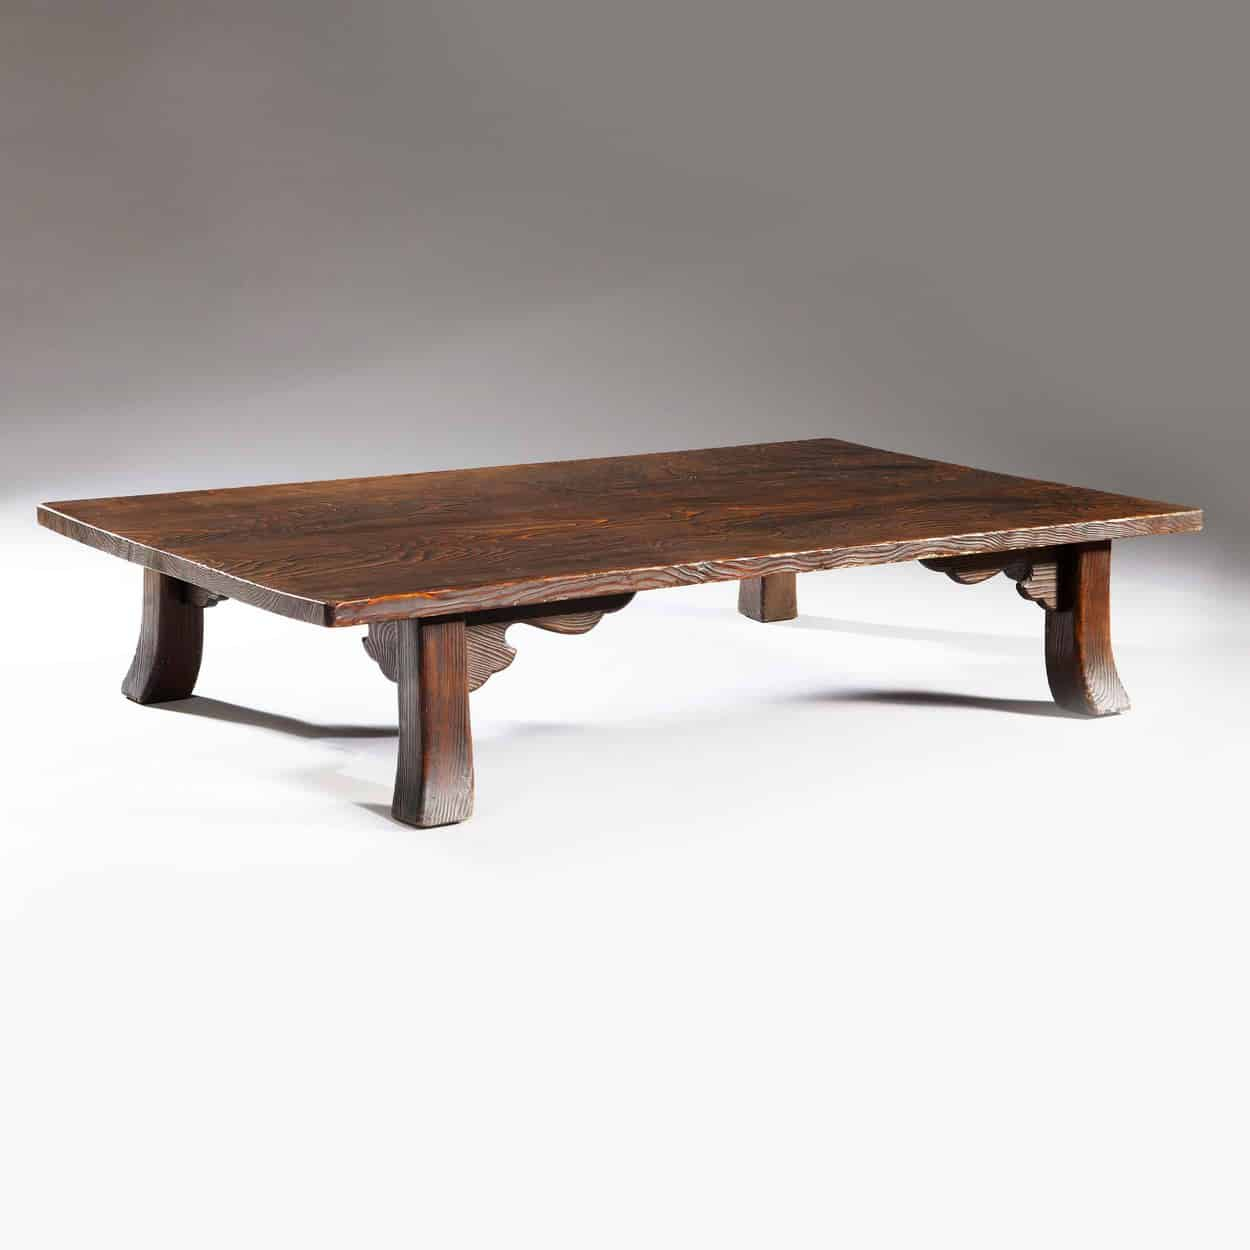 Unique Japanese Low Table Shou Sugi Ban Cedar Wood Coffee Table in sizing 1250 X 1250